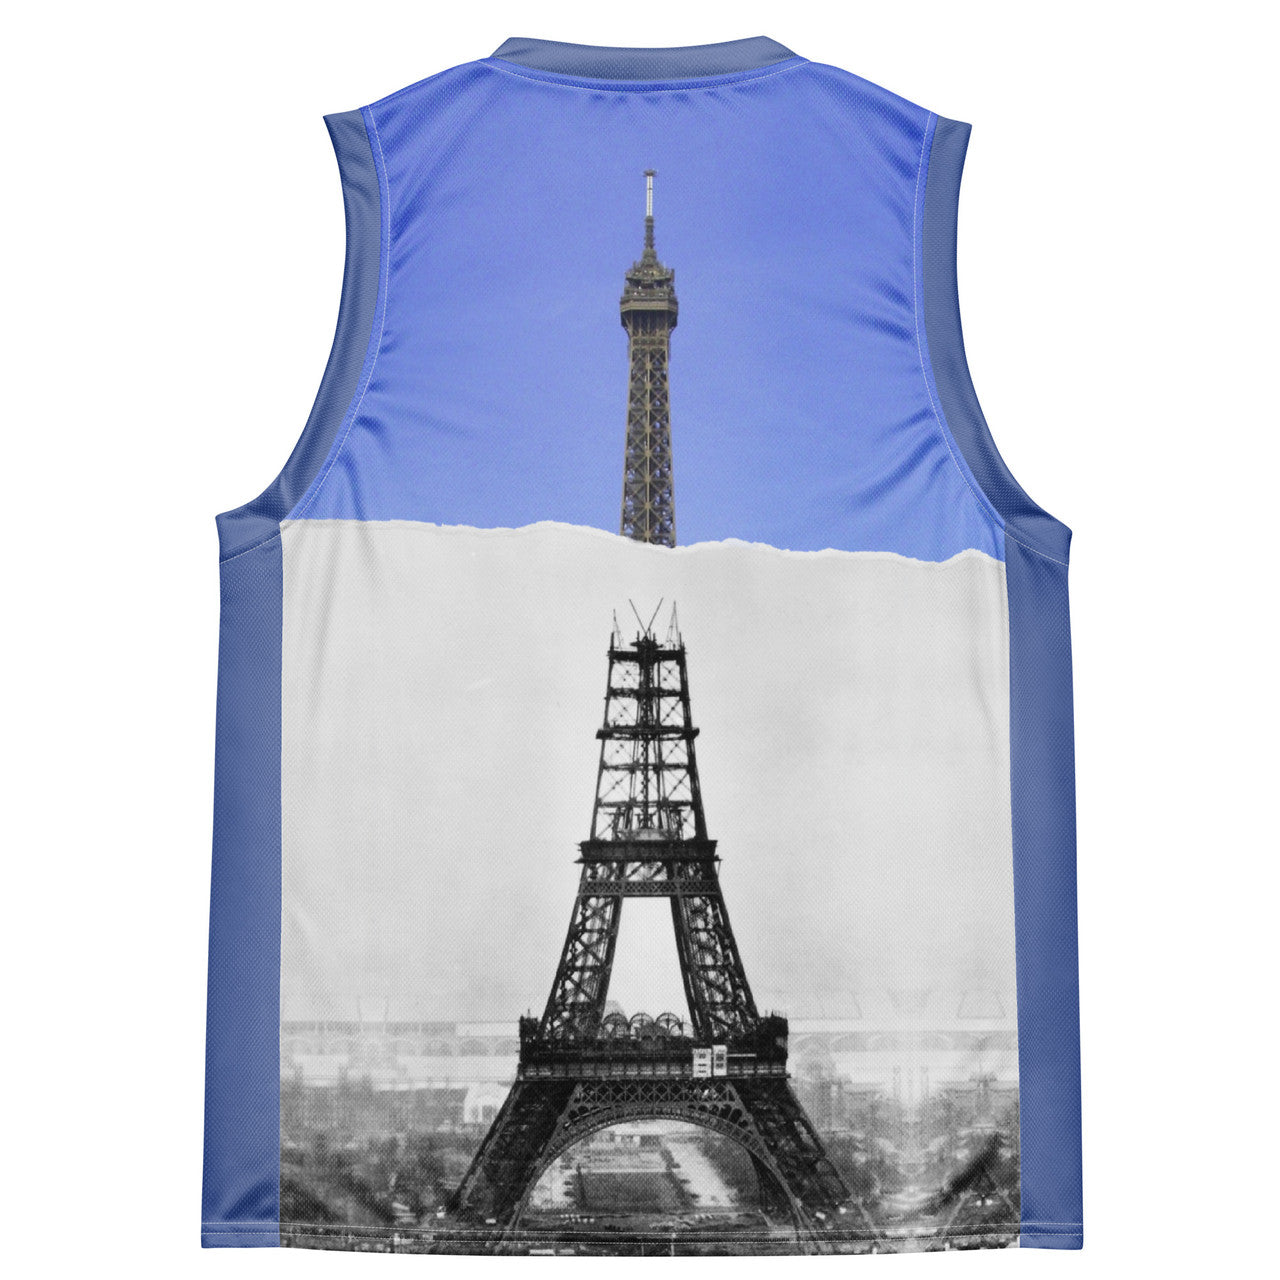 Eiffel Tower KiSS Recycled unisex basketball jersey - Construction France then and now